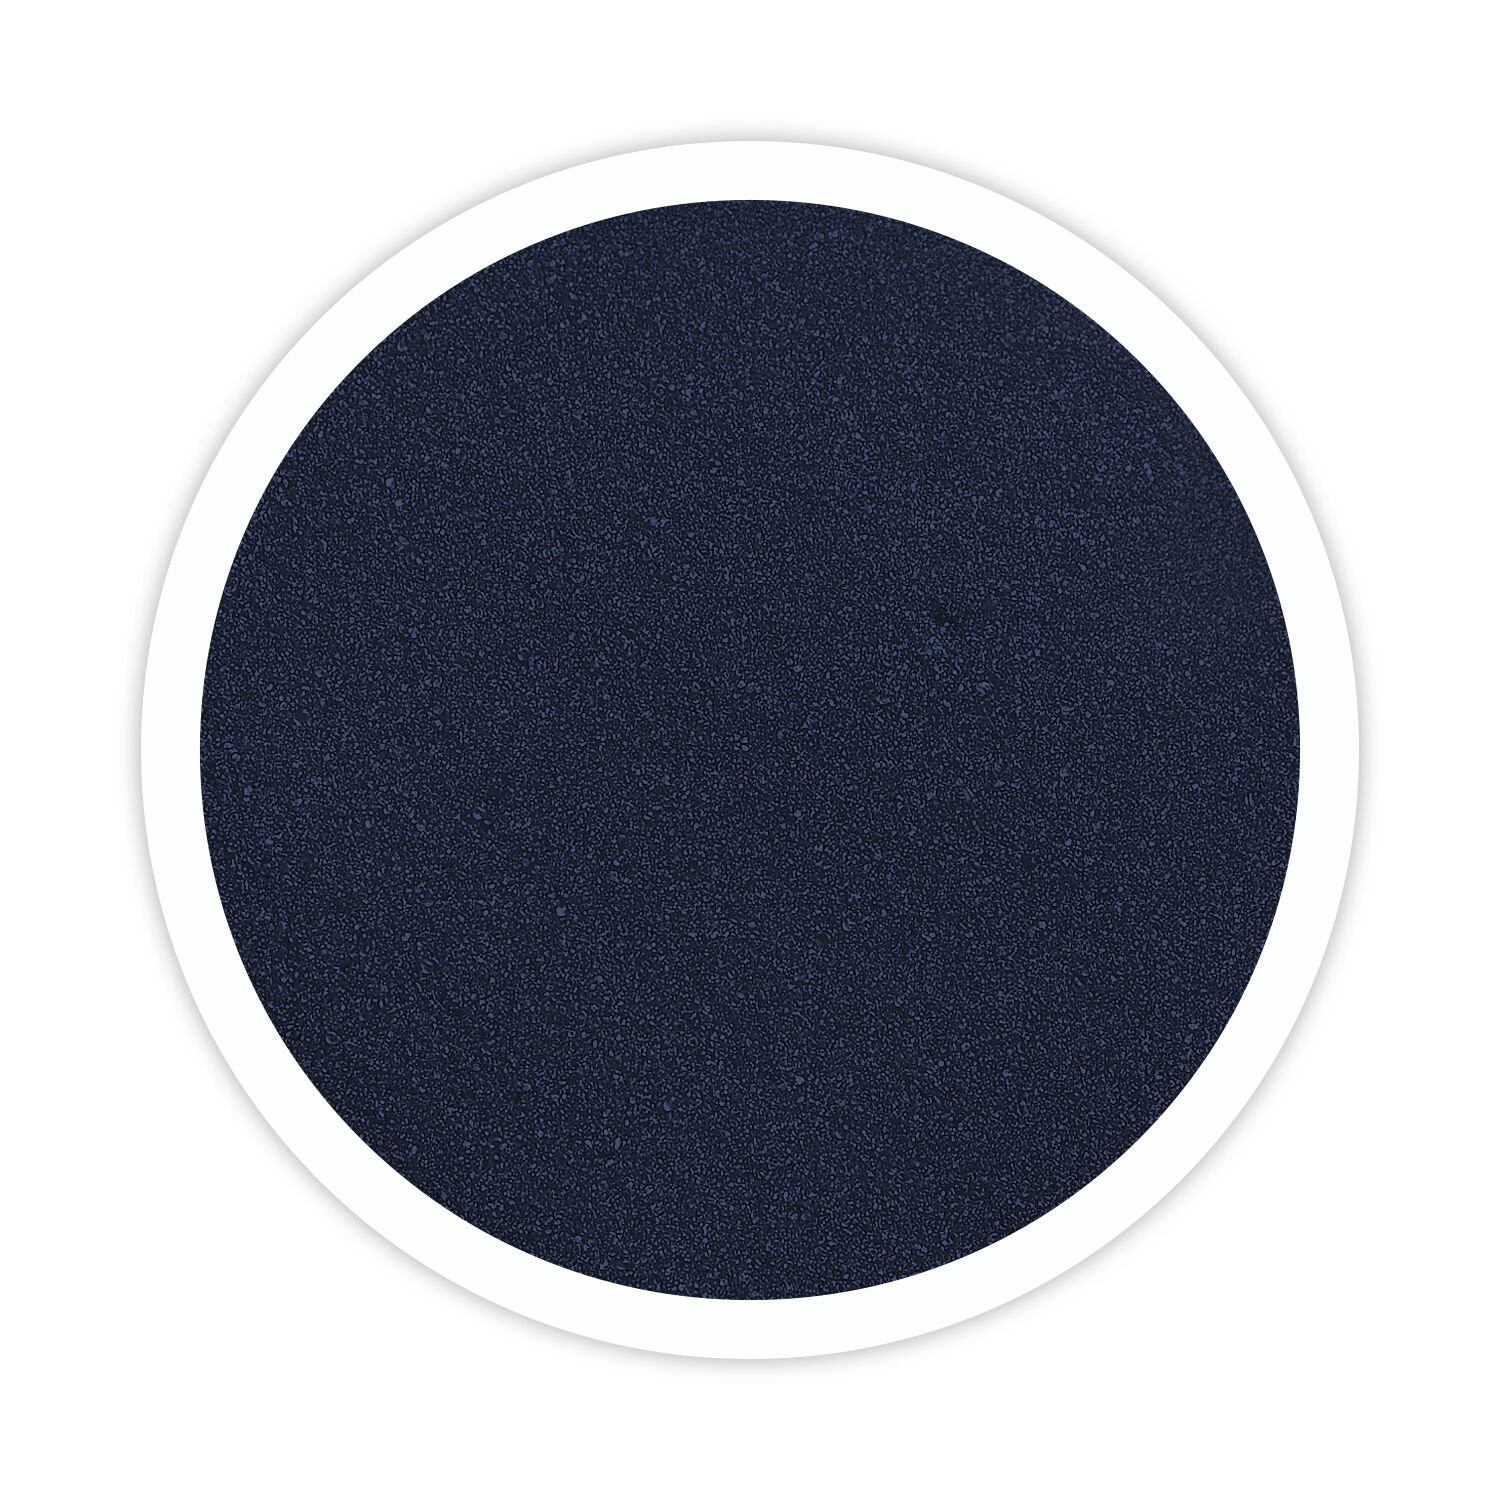 27 Lovely Small Navy Blue Vase 2024 free download small navy blue vase of amazon com black wedding unity sand shadow box set with with sandsational navy blue marine unity sand 1 pound colored sand for weddings